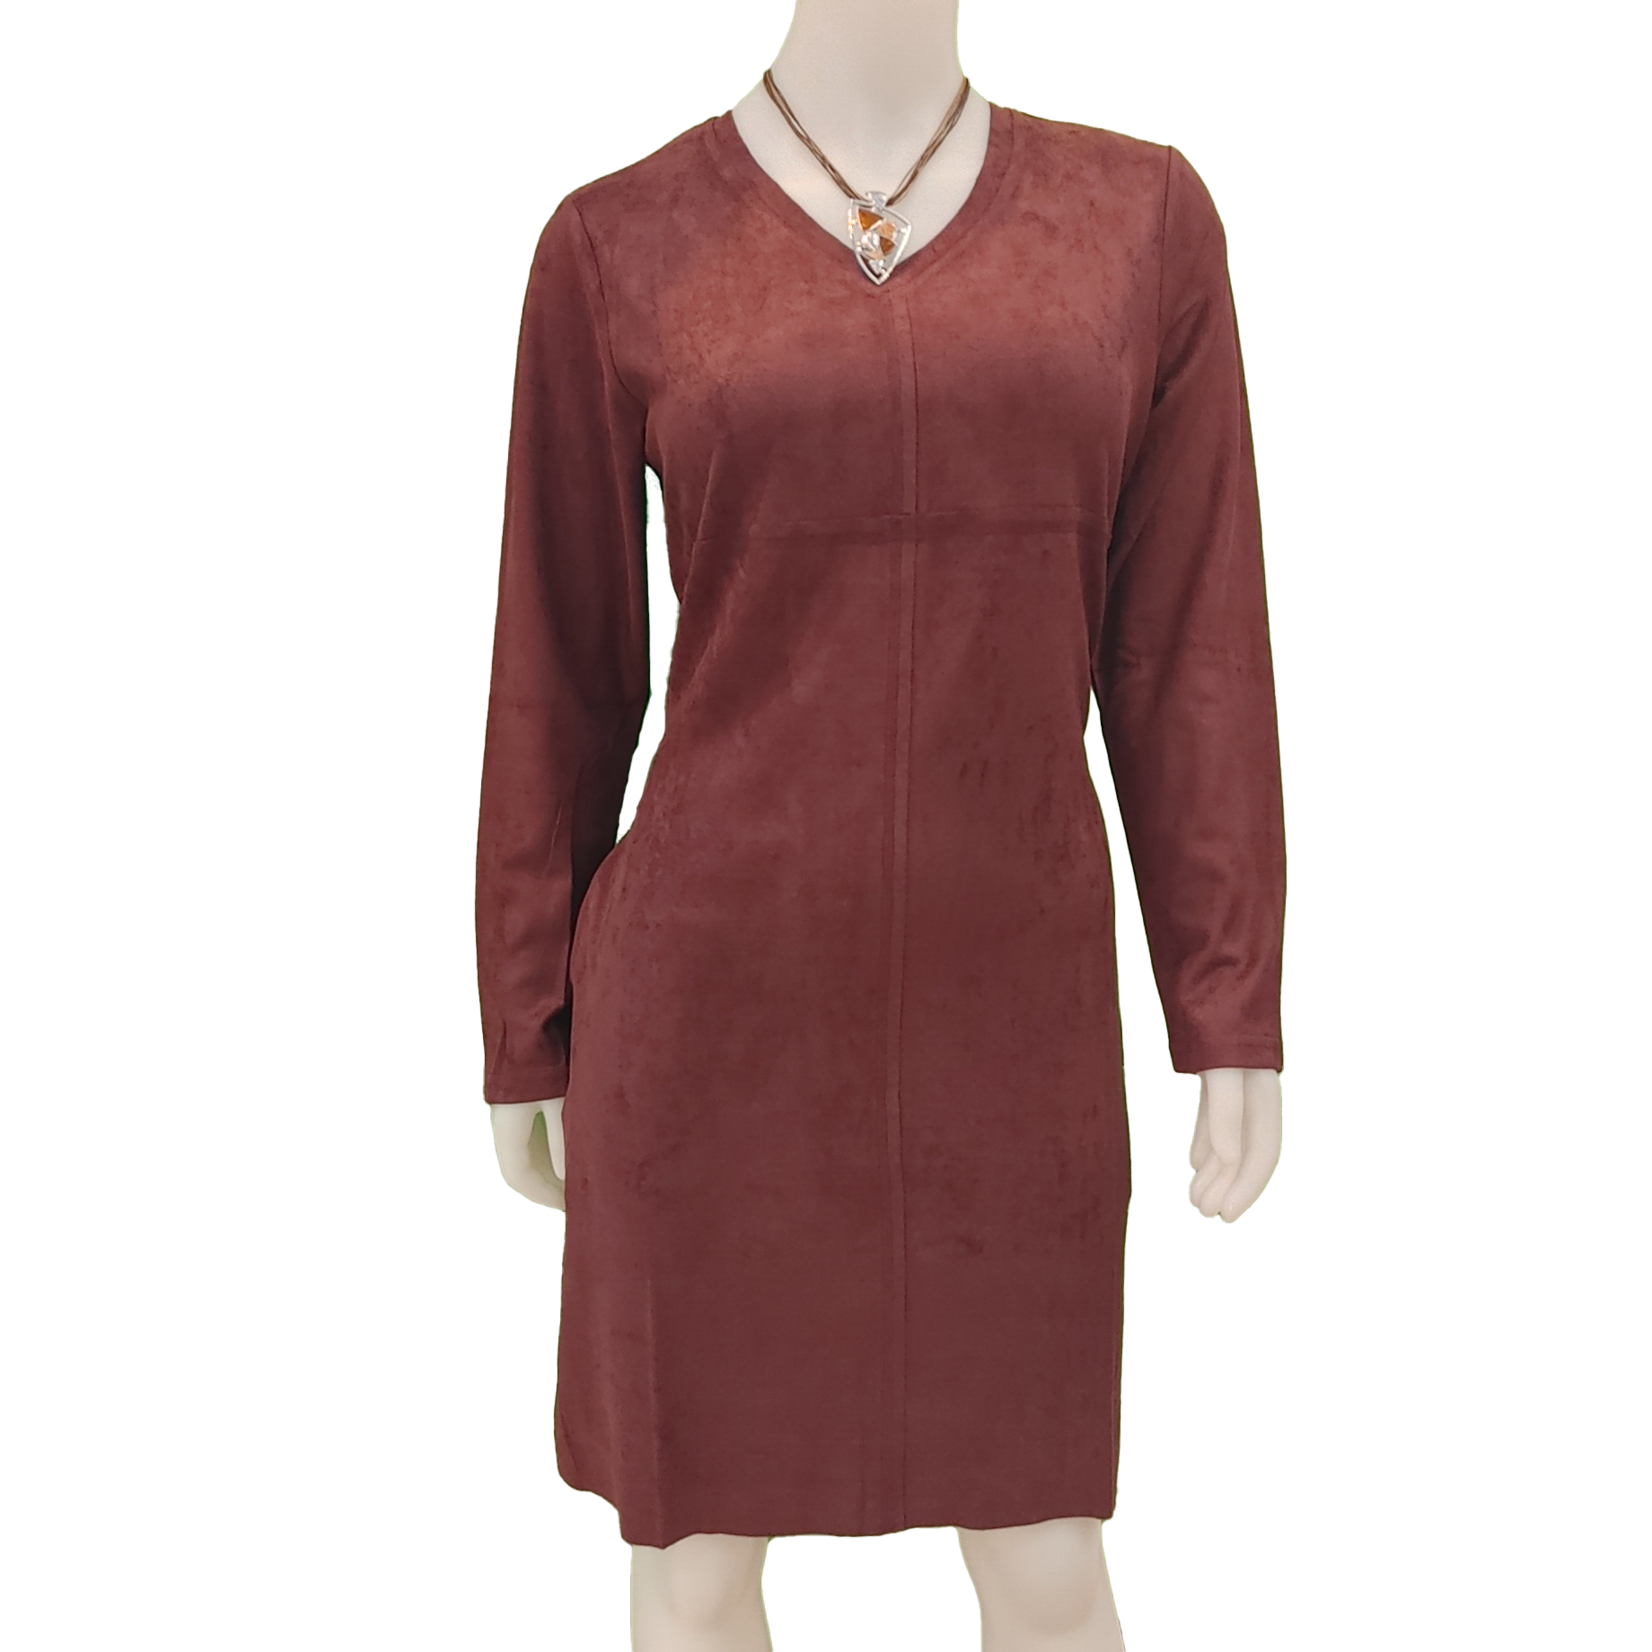 bolide Bolide ladies Long sleeve v-neck faux suede woven dress with pockets, dresses